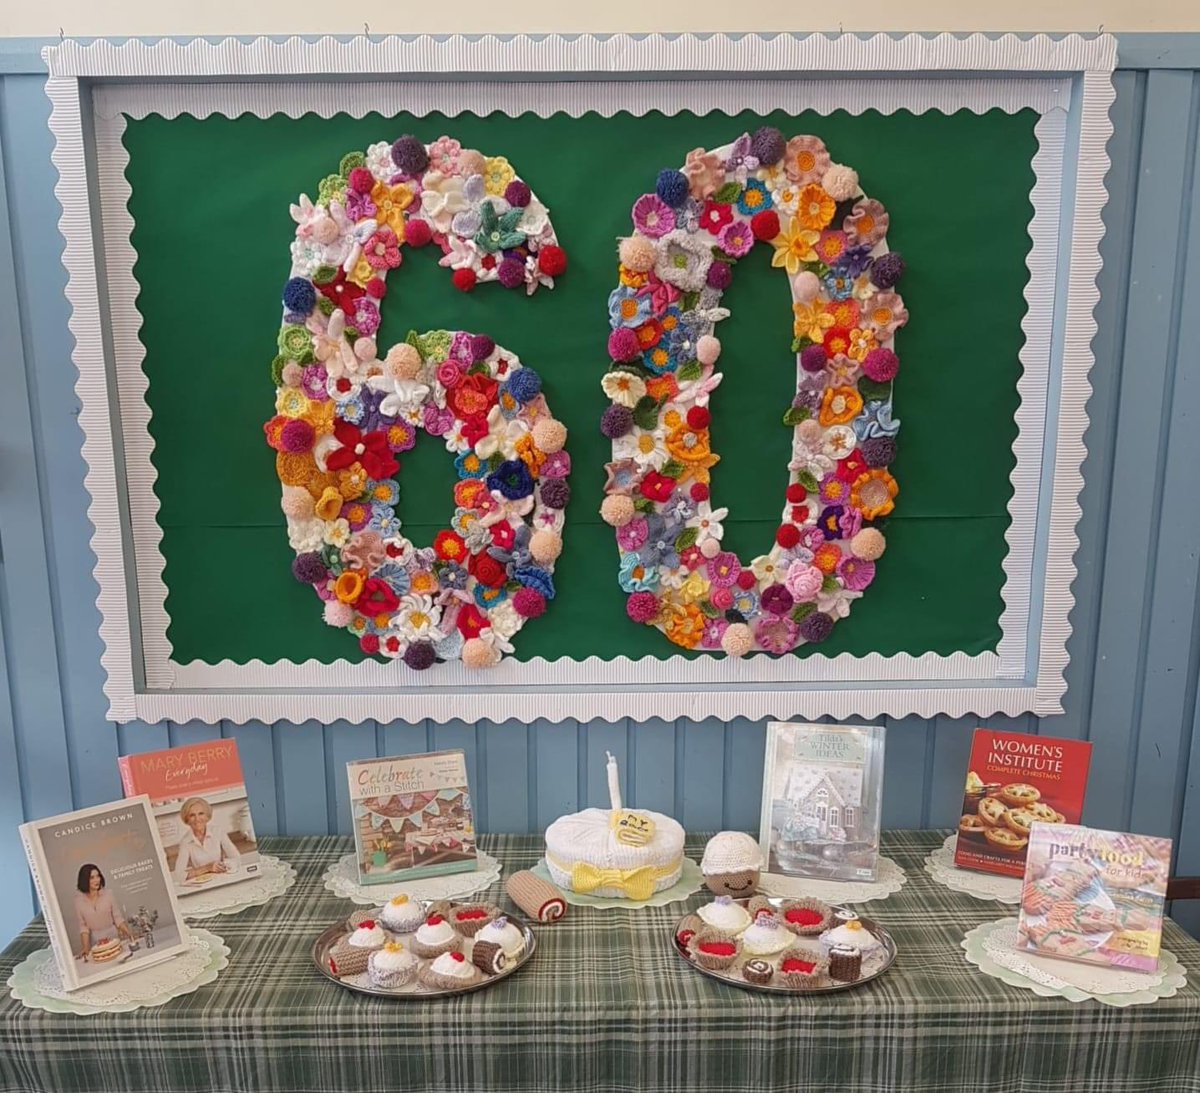 A massive thank you to our wonderful knitting groups for creating this beautiful display to celebrate our sixtieth birthday! #SixtyYearsOfHednesfordLibrary